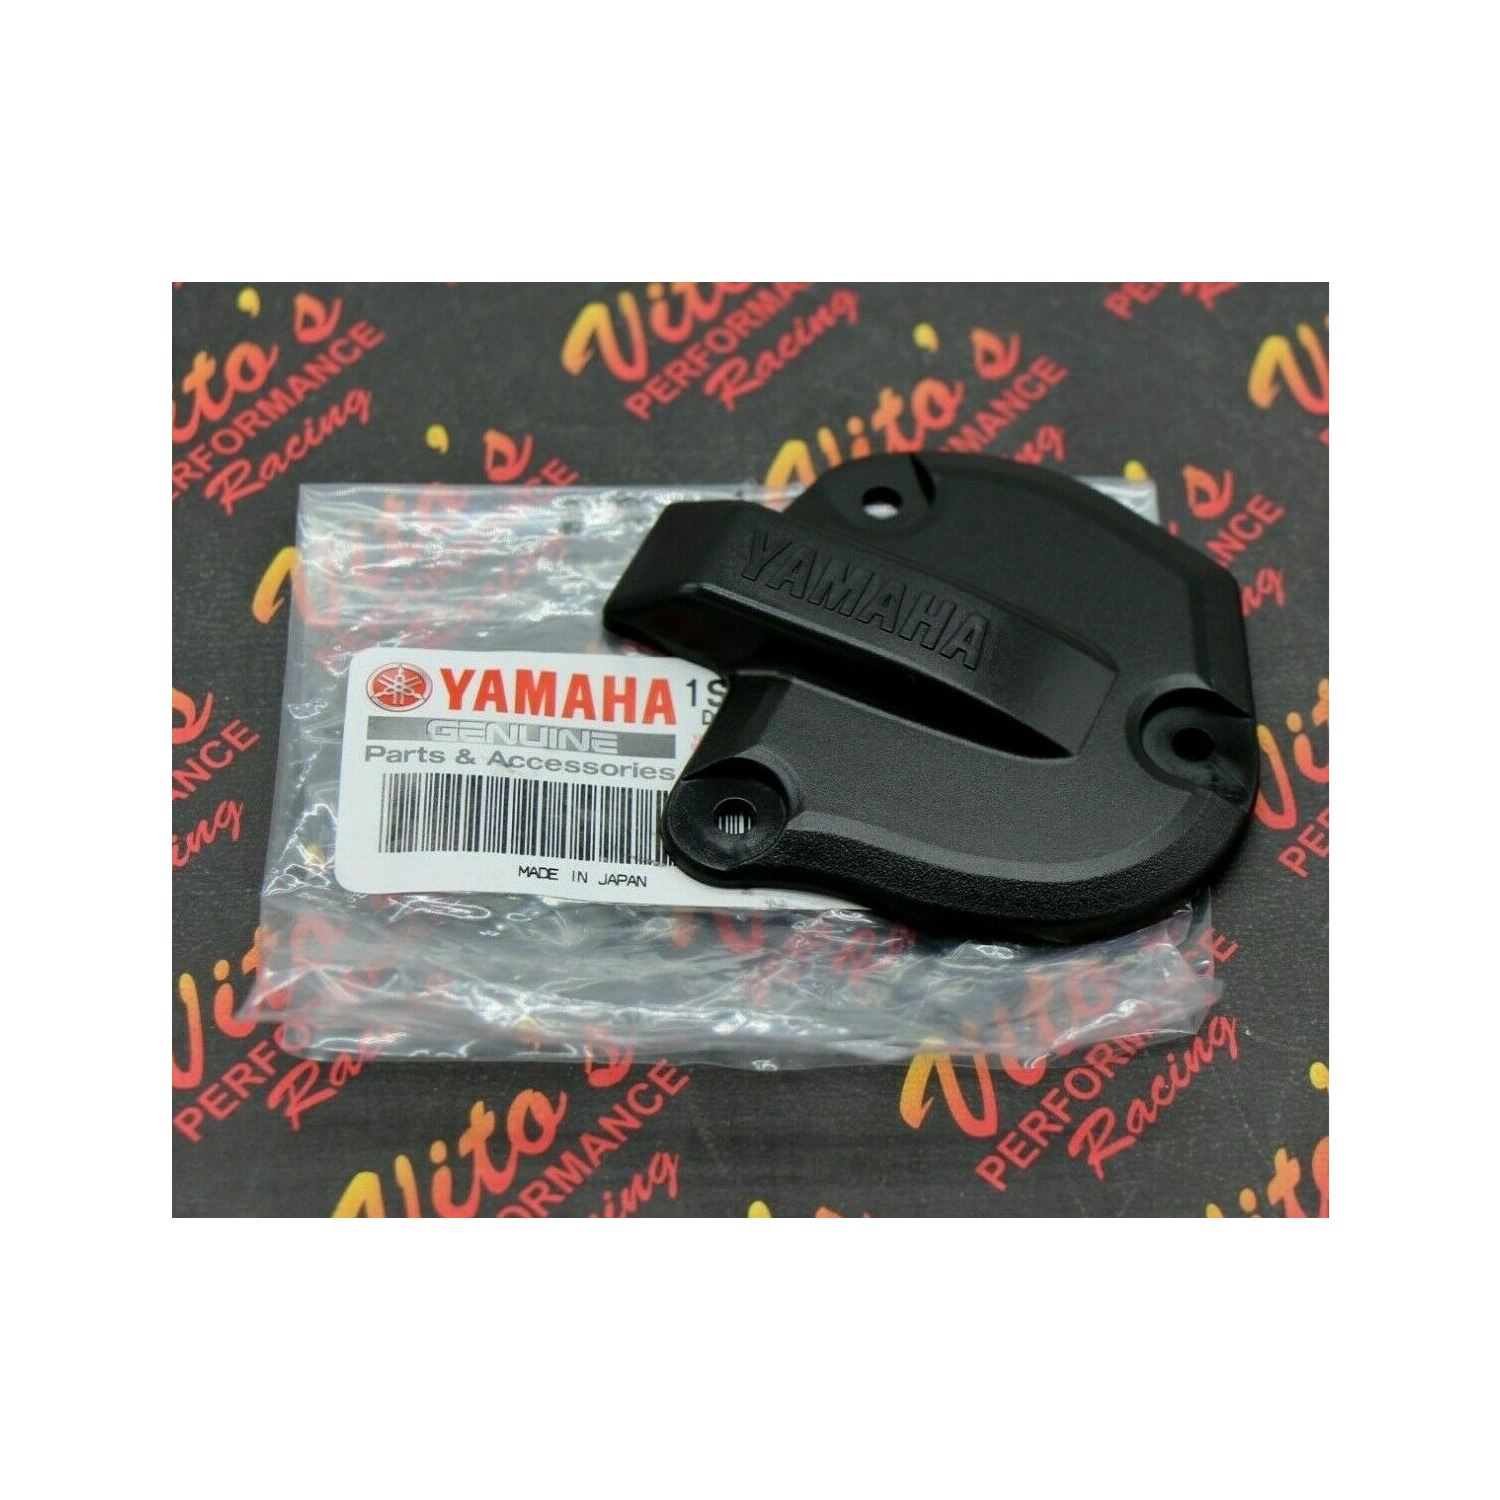 NEW OEM Thumb throttle cover only Yamaha Raptor 70